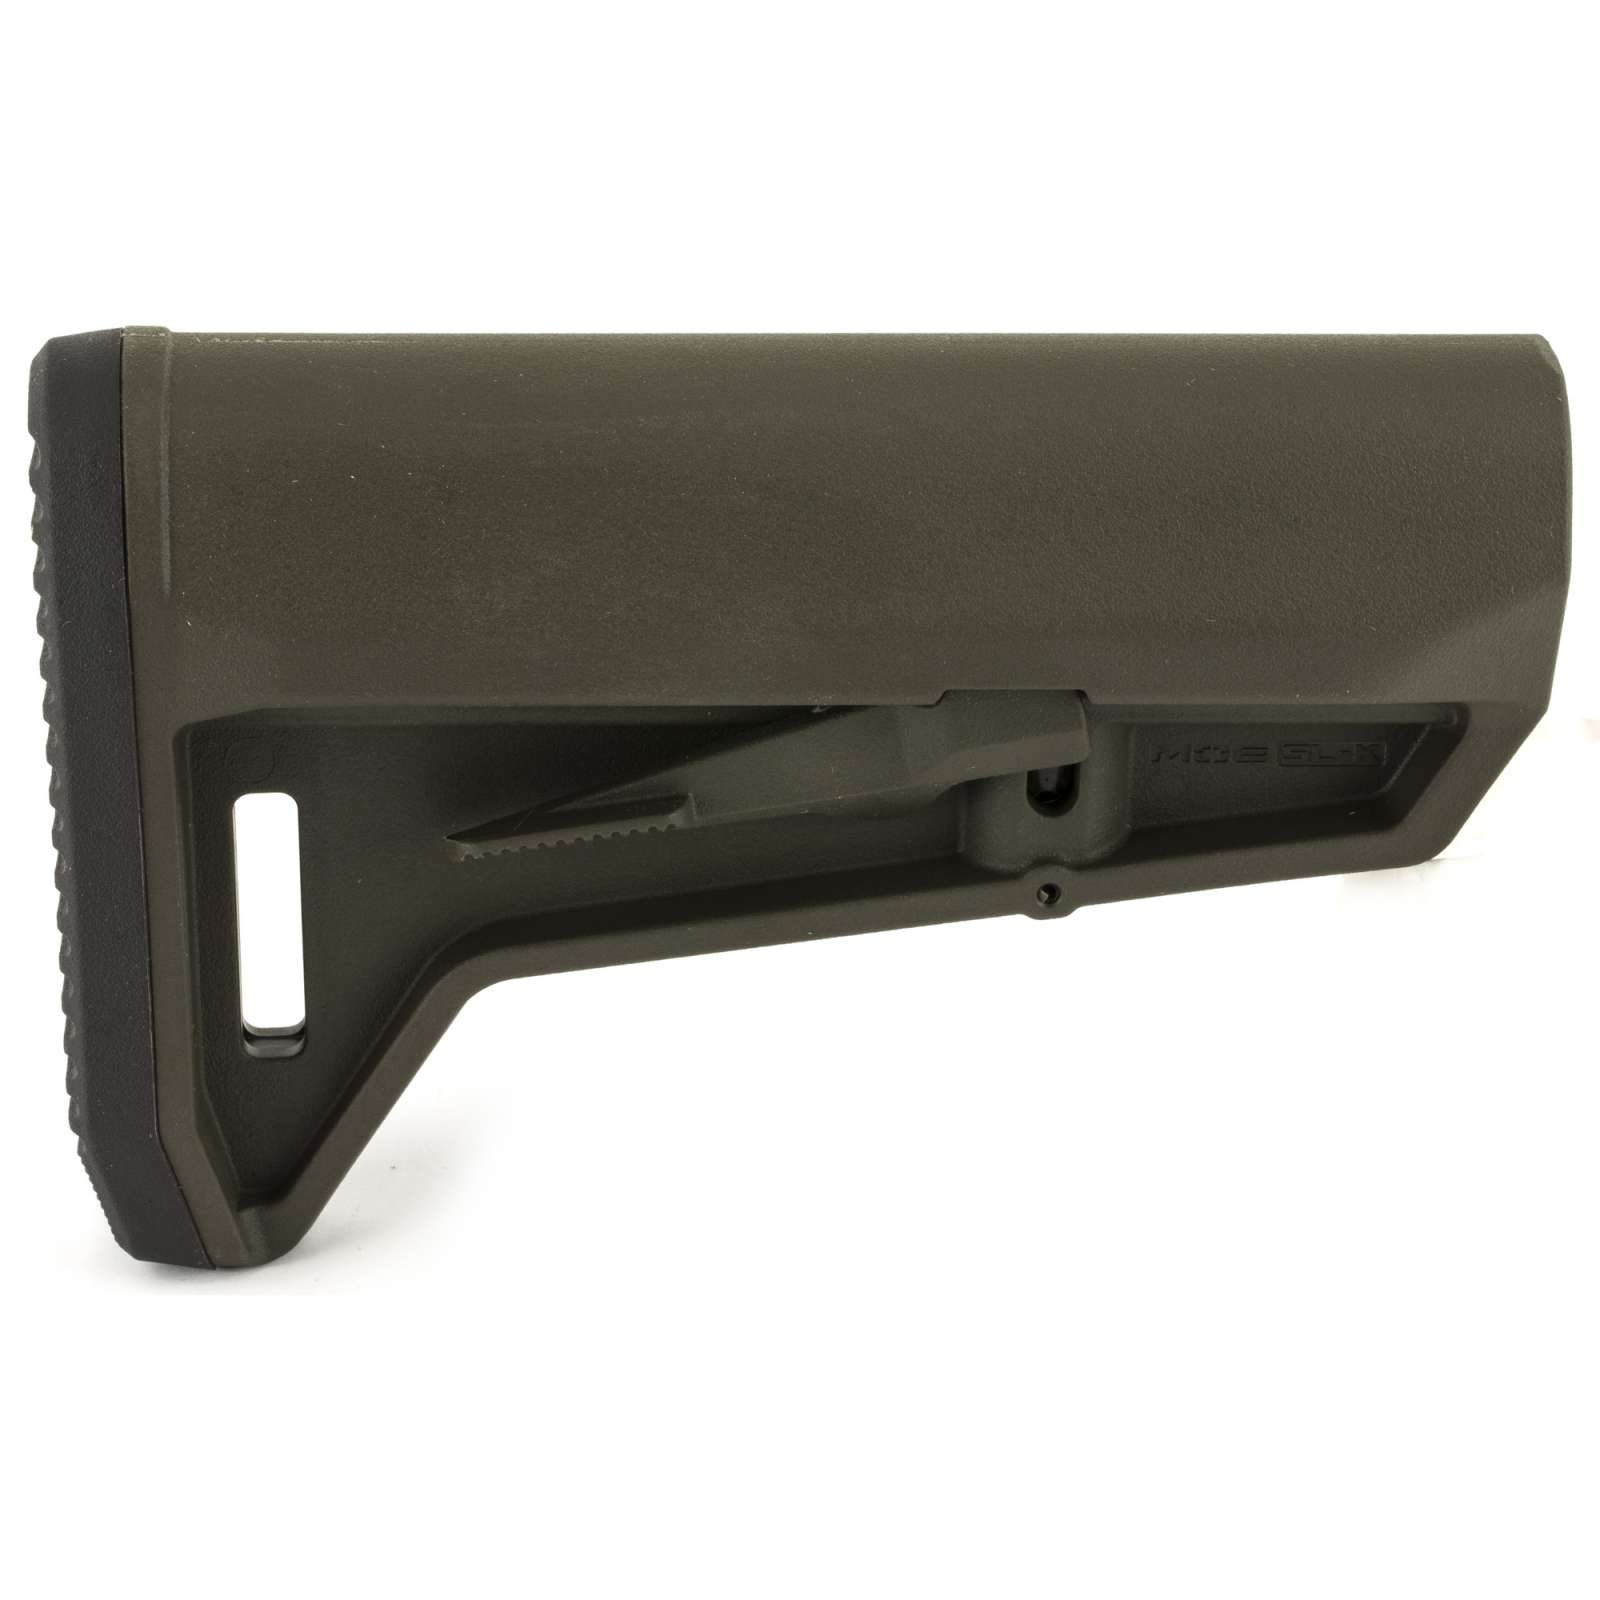 Magpul MAG626-ODG MOE SL-K Carbine Stock OD Green Synthetic for AR15 ...